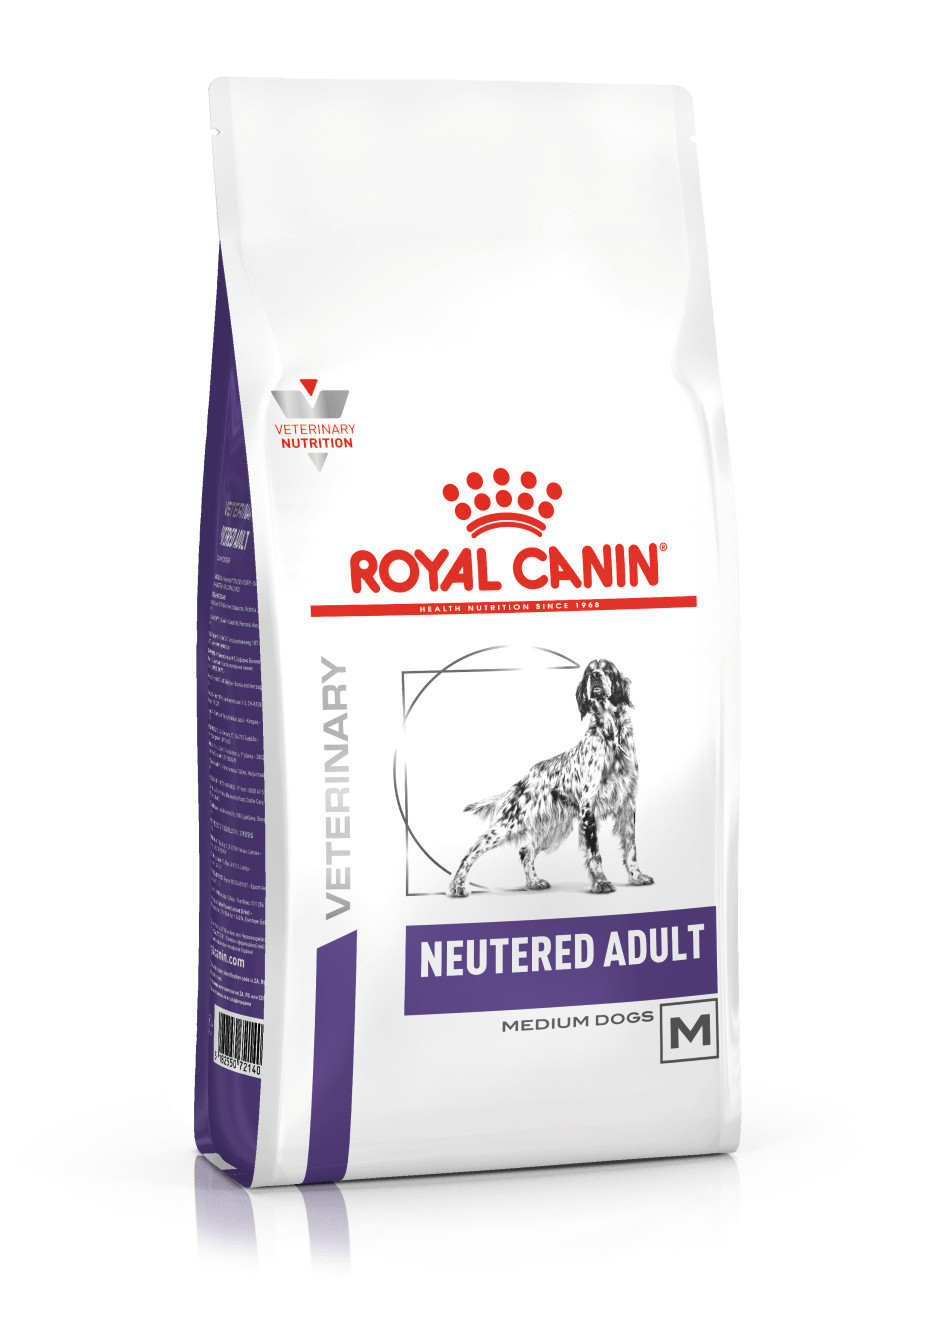 Royal Canin Expert Neutered Adult Medium Dogs pour chien